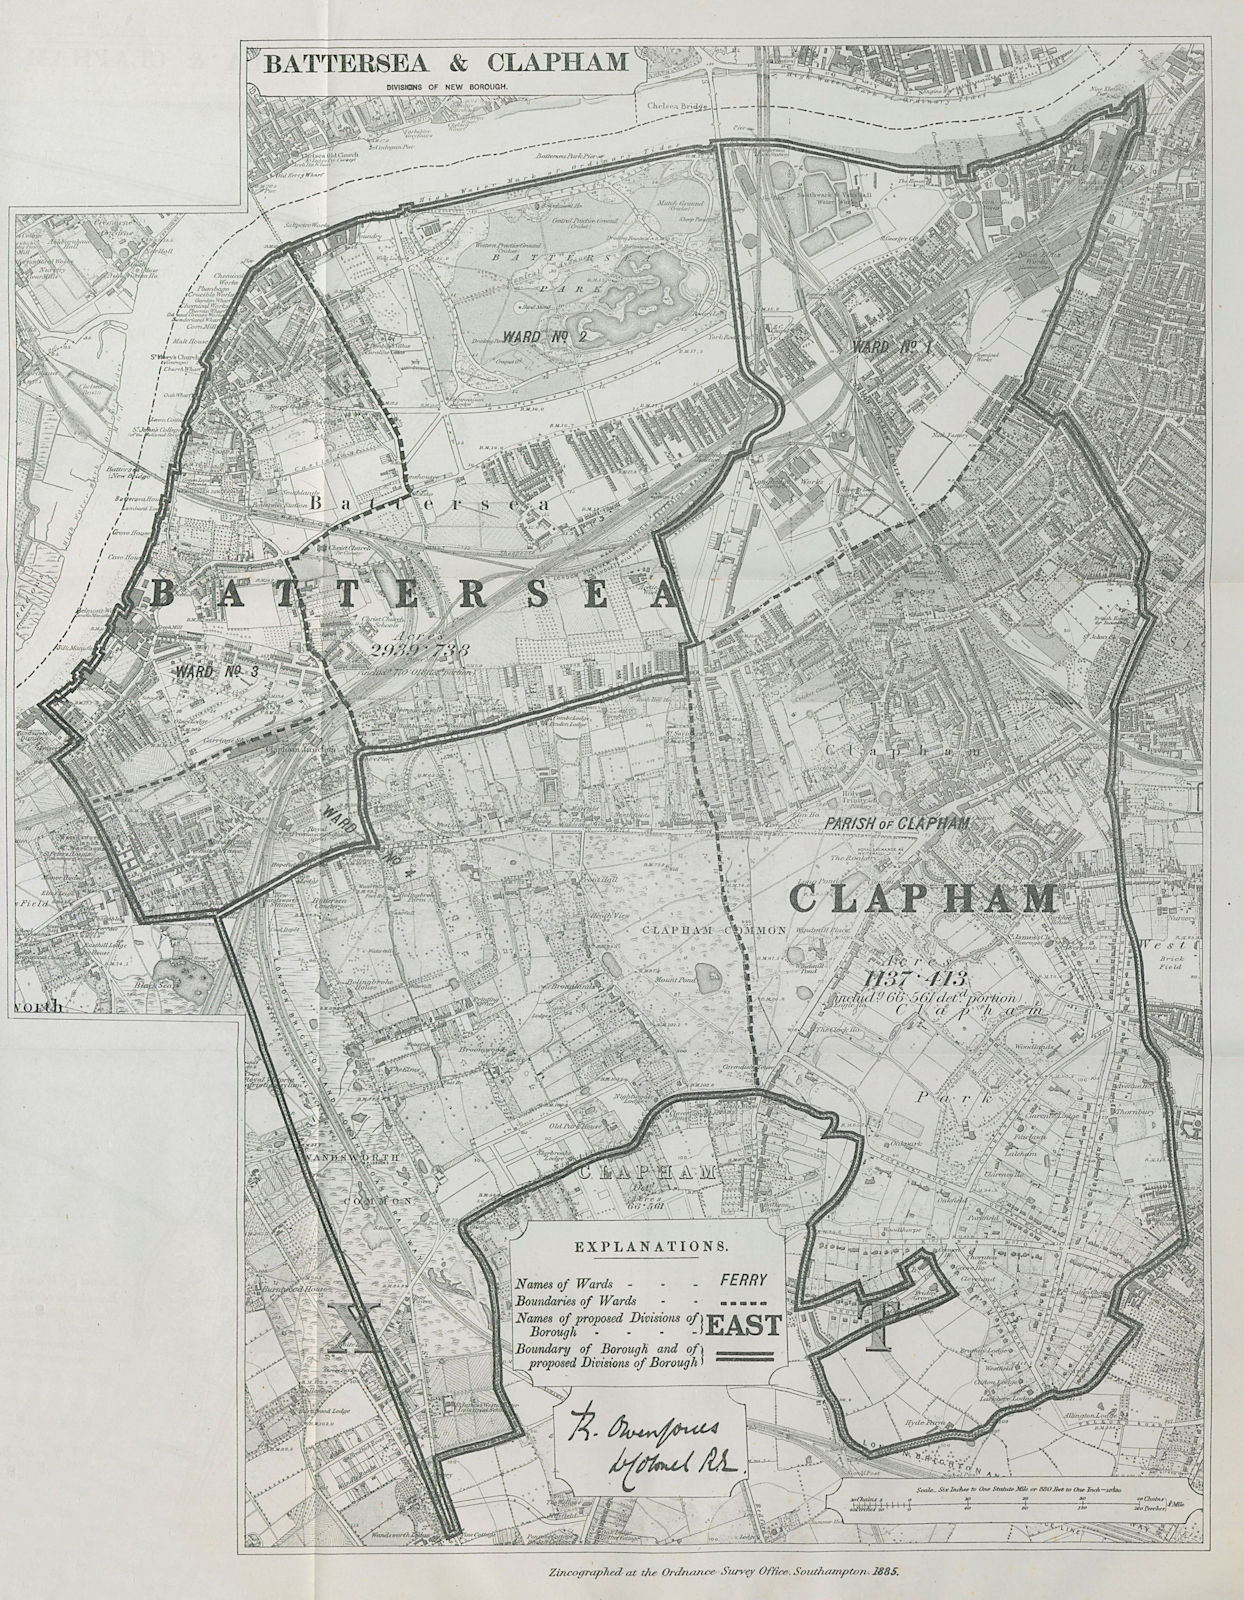 Associate Product Battersea & Clapham Parliamentary Borough. BOUNDARY COMMISSION 1885 old map